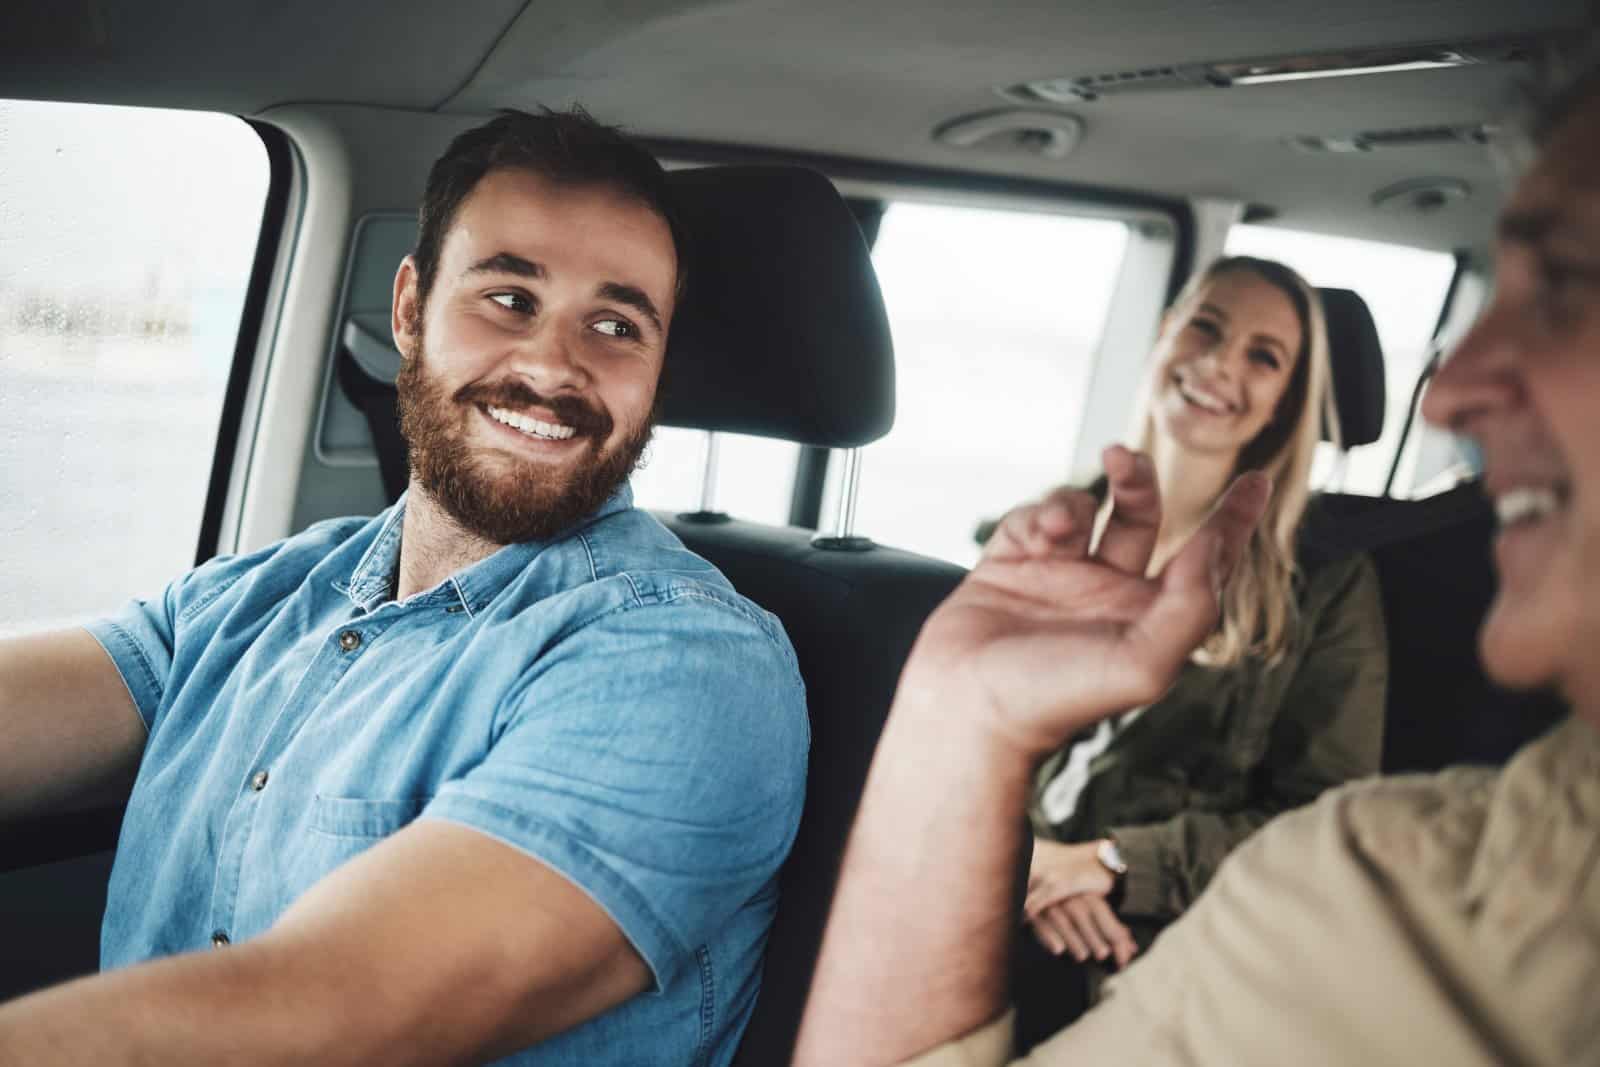 <p class="wp-caption-text">Image Credit: Shutterstock / PeopleImages.com – Yuri A</p>  <p><span>A family road trip is an opportunity to explore, learn, and grow together. By meticulously planning yet remaining flexible, prioritizing safety, and embracing the spirit of adventure, you can ensure a memorable experience for all. The ultimate goal is to enjoy the time spent with your loved ones, discover new places, and create stories you will share for years. </span></p> <p><span>More Articles Like This…</span></p> <p><a href="https://thegreenvoyage.com/barcelona-discover-the-top-10-beach-clubs/"><span>Barcelona: Discover the Top 10 Beach Clubs</span></a></p> <p><a href="https://thegreenvoyage.com/top-destination-cities-to-visit/"><span>2024 Global City Travel Guide – Your Passport to the World’s Top Destination Cities</span></a></p> <p><a href="https://thegreenvoyage.com/exploring-khao-yai-a-hidden-gem-of-thailand/"><span>Exploring Khao Yai 2024 – A Hidden Gem of Thailand</span></a></p> <p><span>The post <a href="https://passingthru.com/guide-to-surviving-family-road-trips/">Ultimate Guide to Surviving Family Road Trips</a> republished on </span><a href="https://passingthru.com/"><span>Passing Thru</span></a><span> with permission from </span><a href="https://thegreenvoyage.com/"><span>The Green Voyage</span></a><span>.</span></p> <p><span>Featured Image Credit: Shutterstock / Soloviova Liudmyla.</span></p> <p><span>For transparency, this content was partly developed with AI assistance and carefully curated by an experienced editor to be informative and ensure accuracy.</span></p>